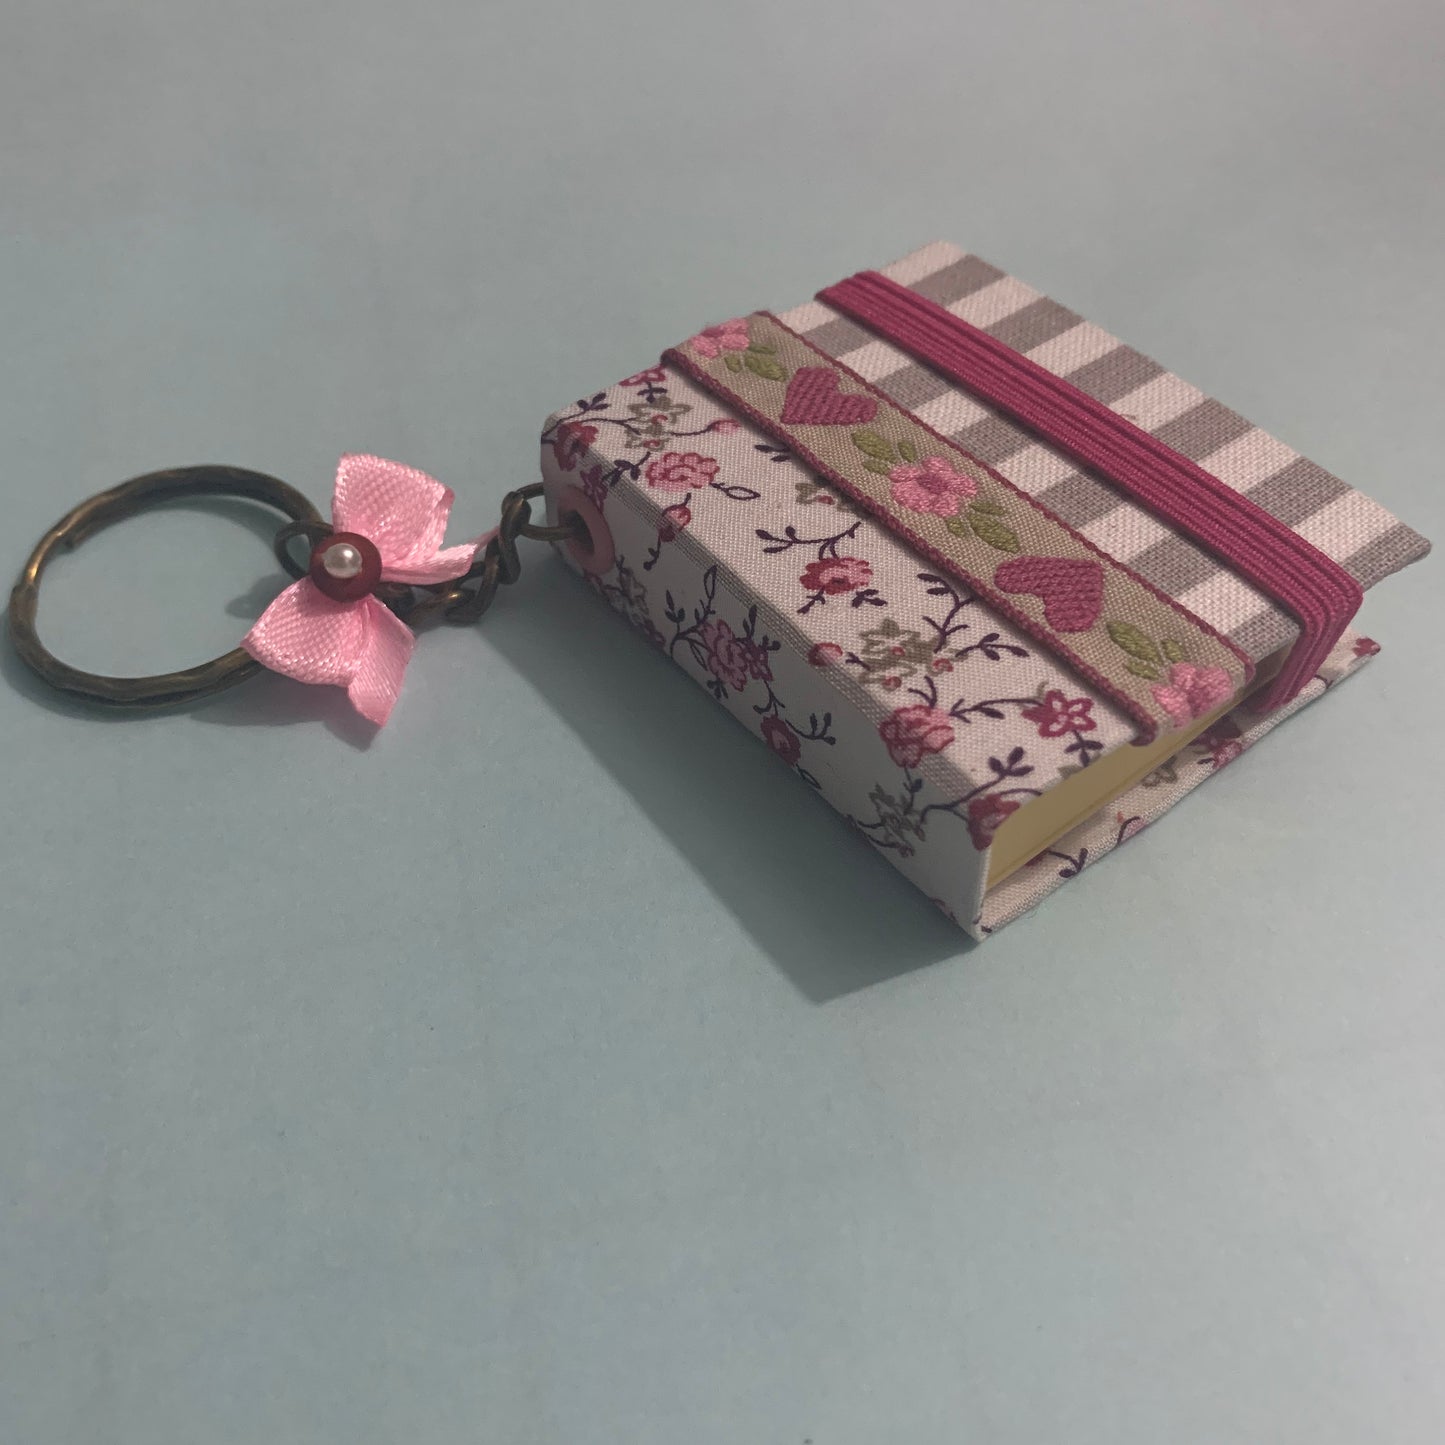 Cute Sticky Notes Keychain 2 - Choose your colours!